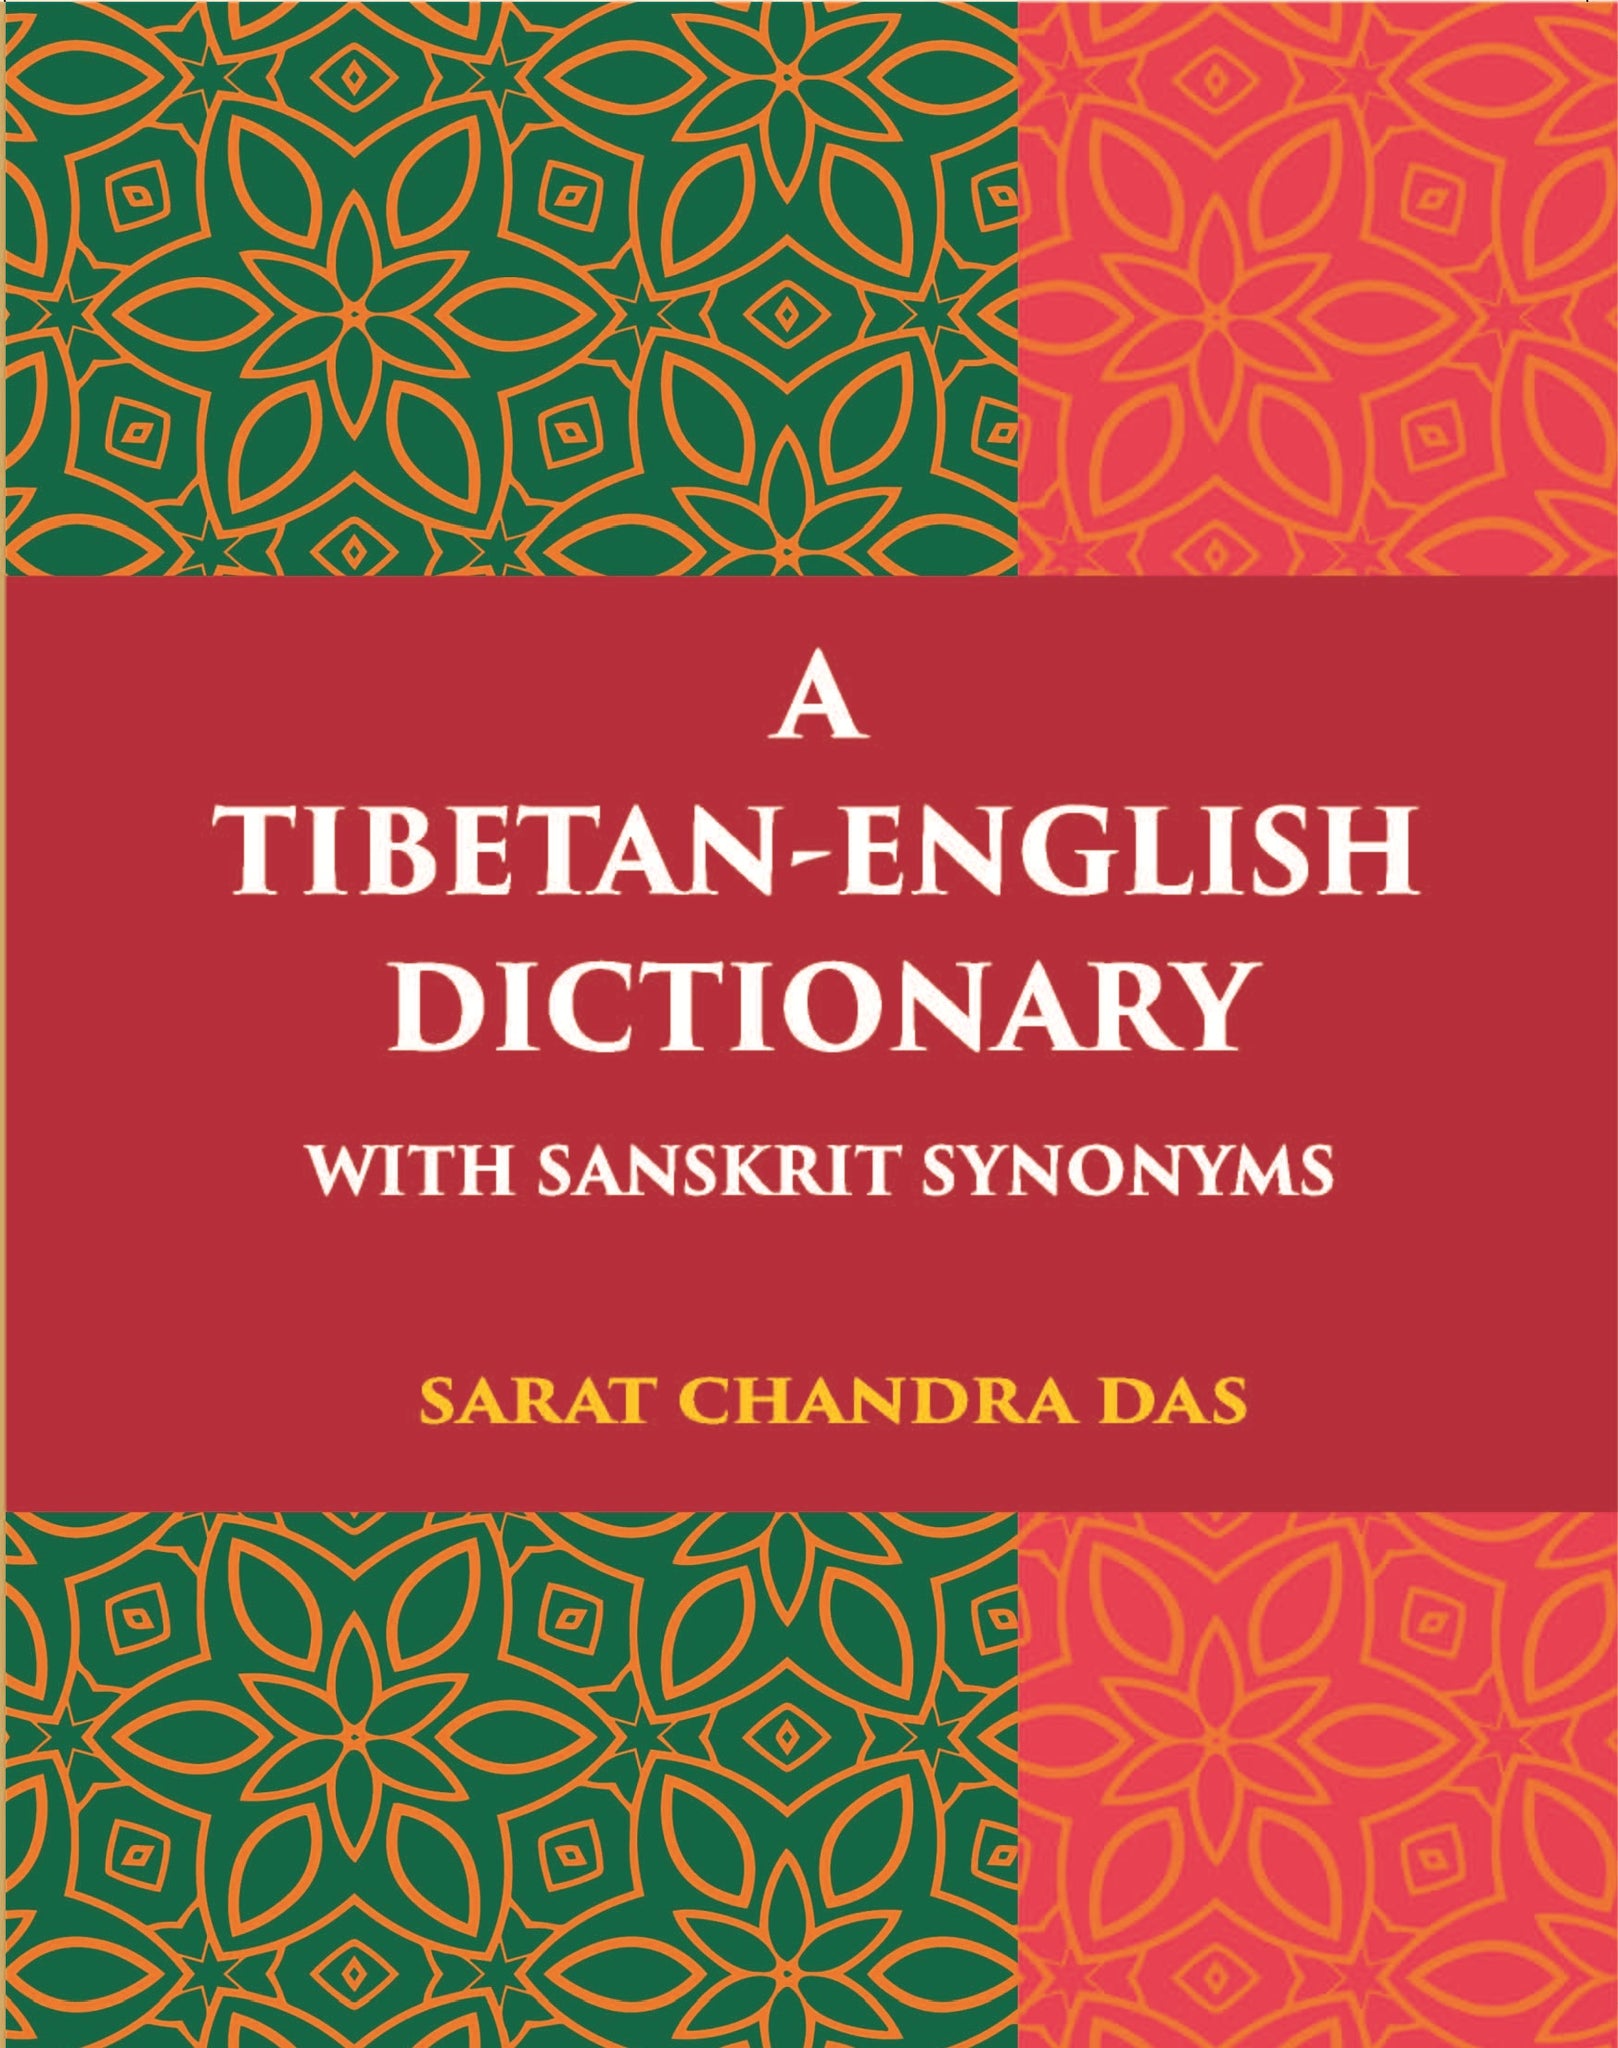 A Tibetan-English Dictionary With Sanskrit Synonyms